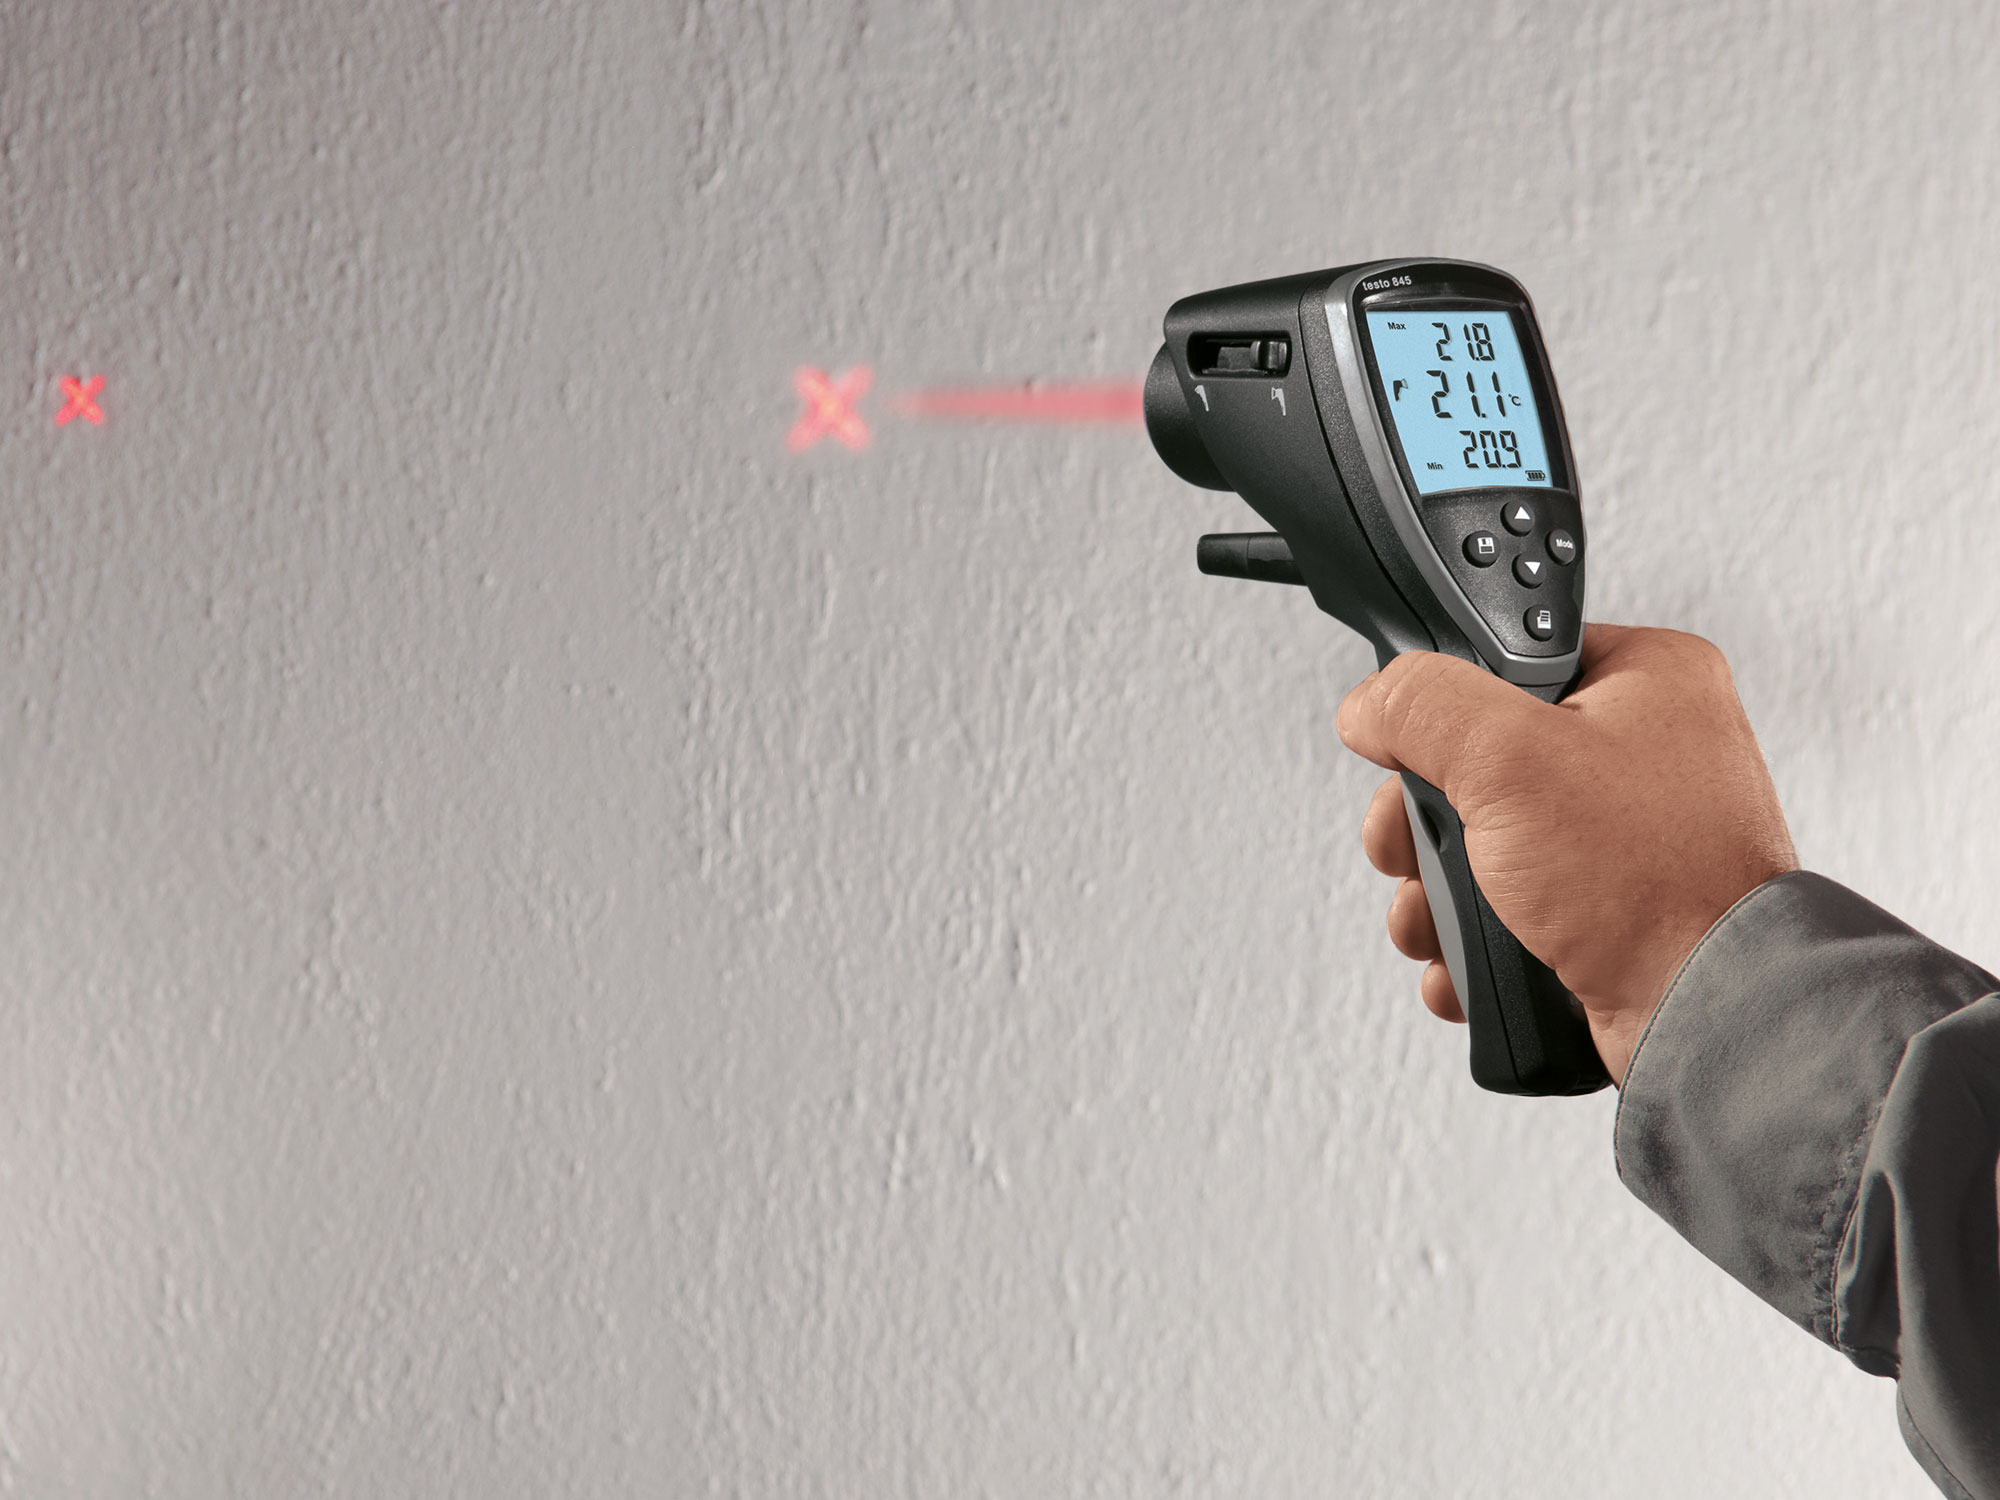 Full Guide & Tips: How to Use An Infrared Thermometer